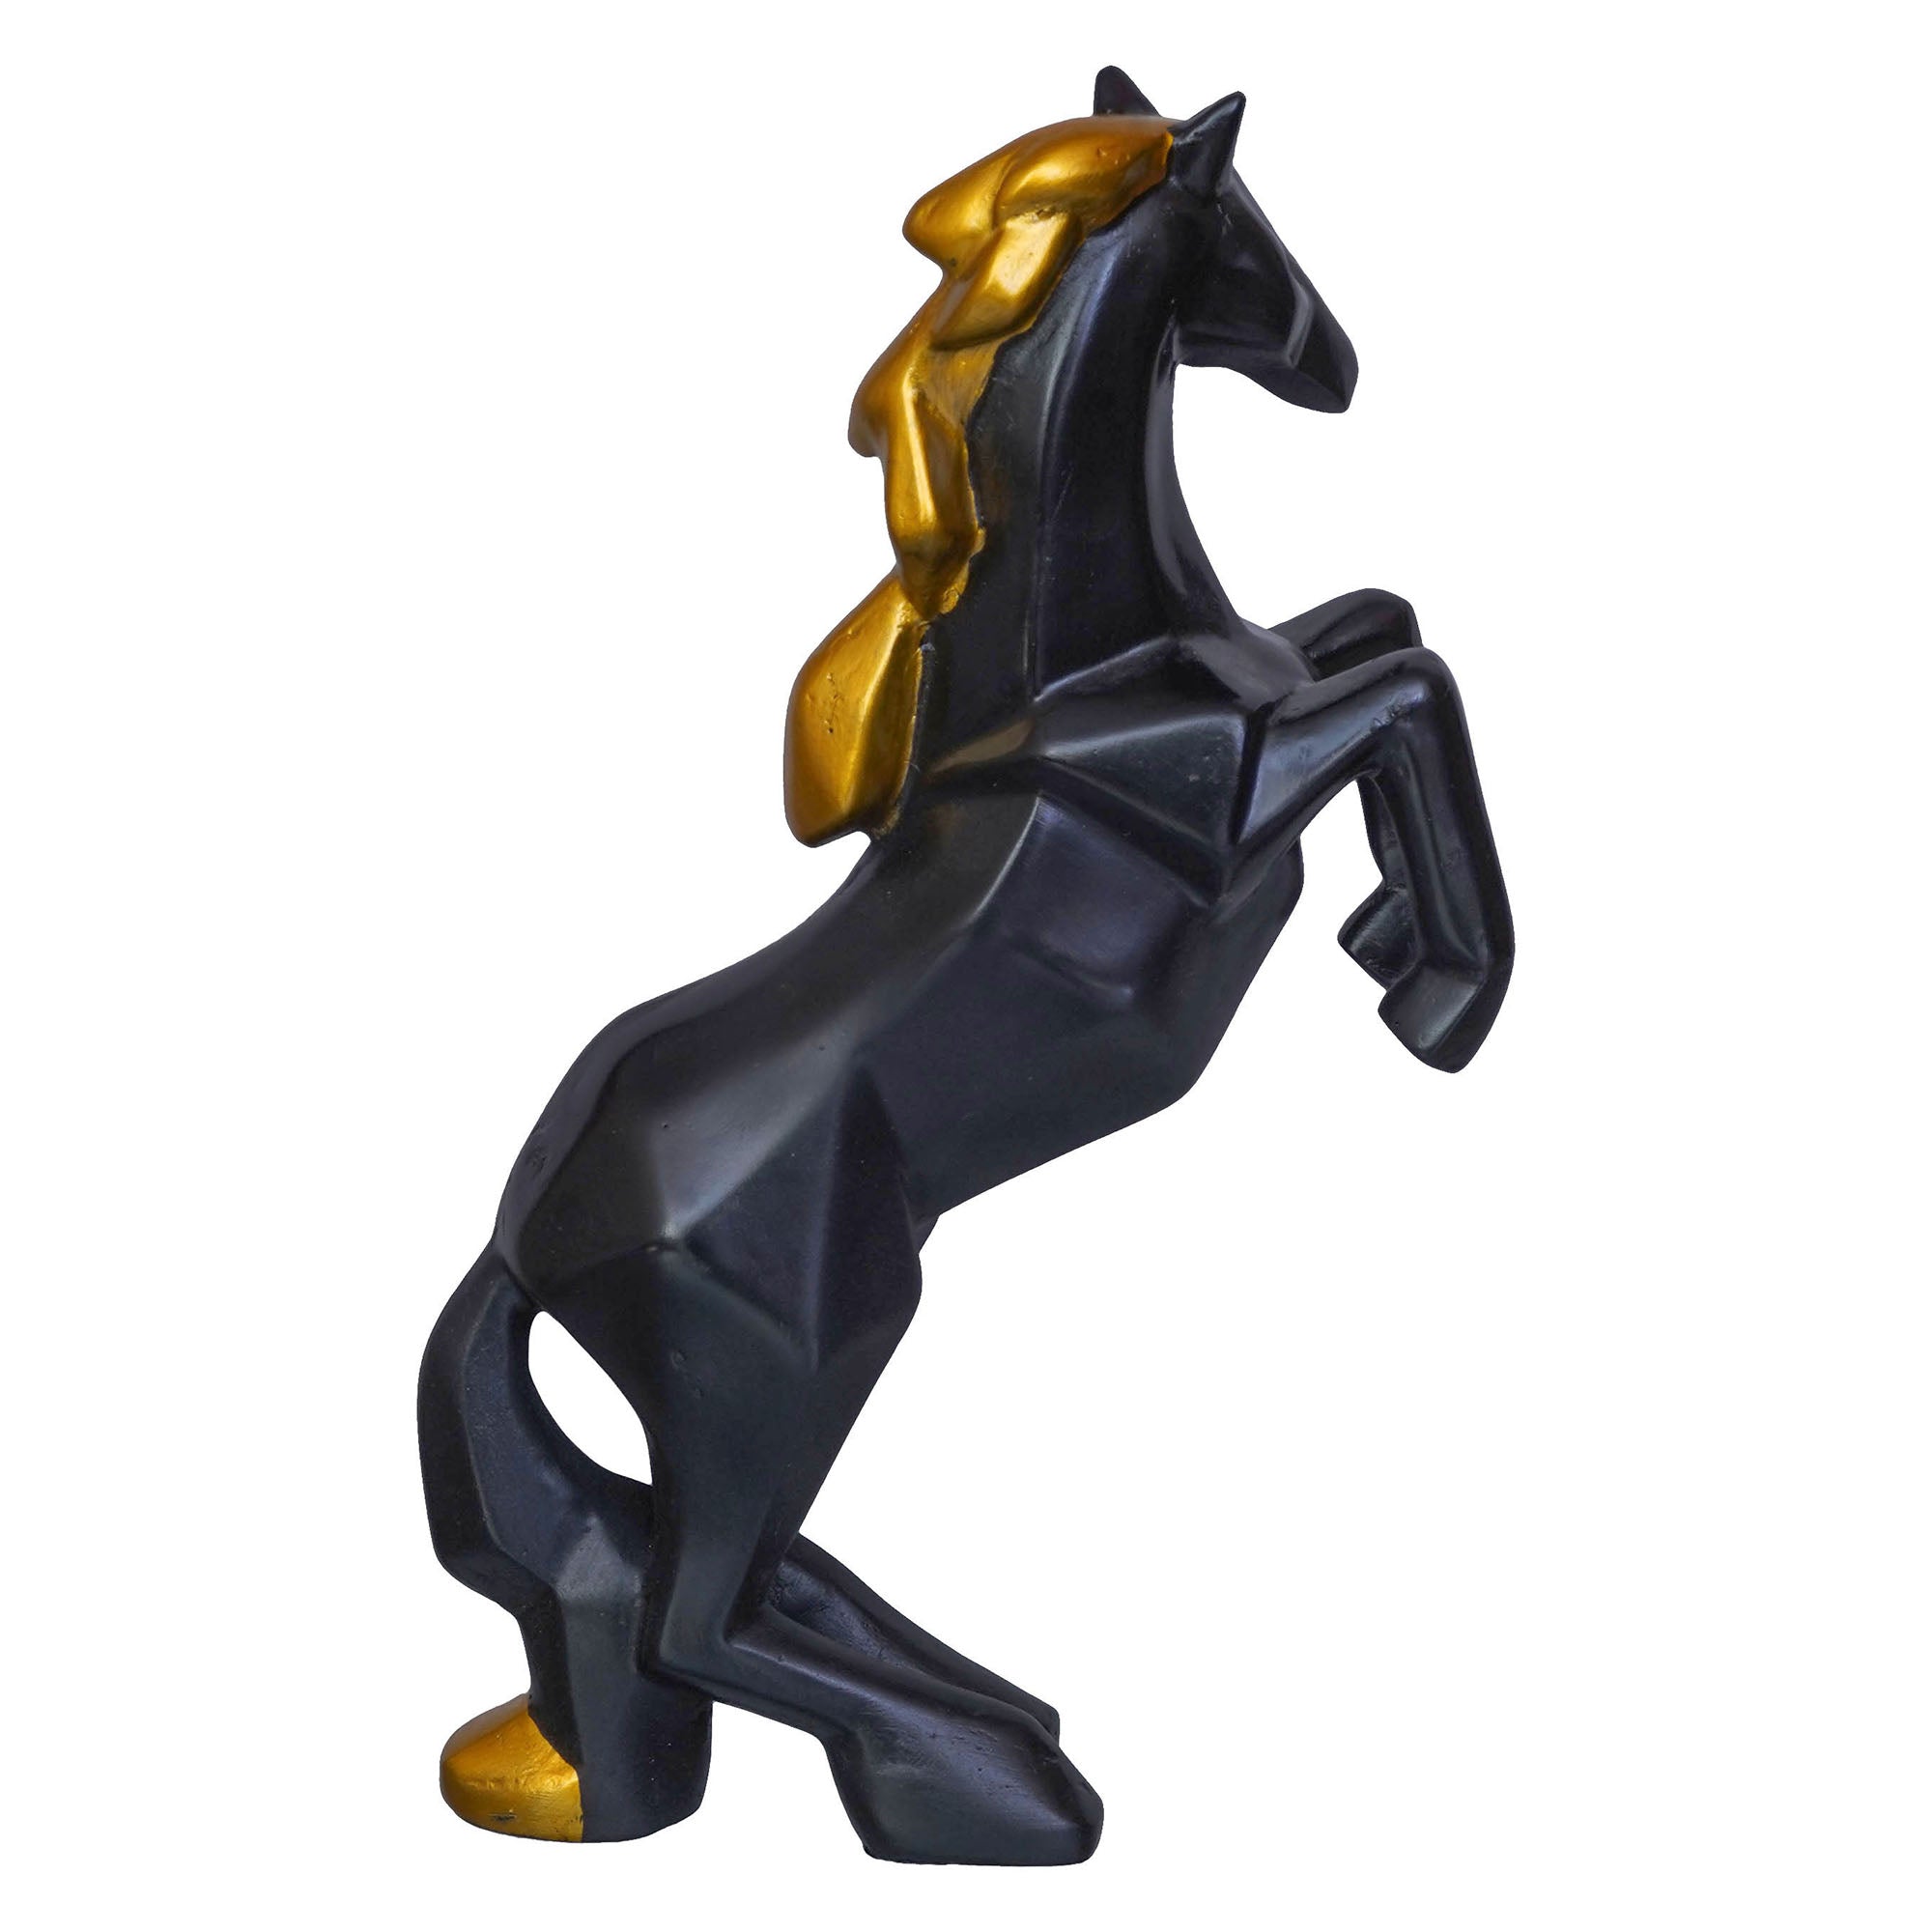 Black Polyresin Jumping Horse Statue with Golden Hair Animal Figurine 6